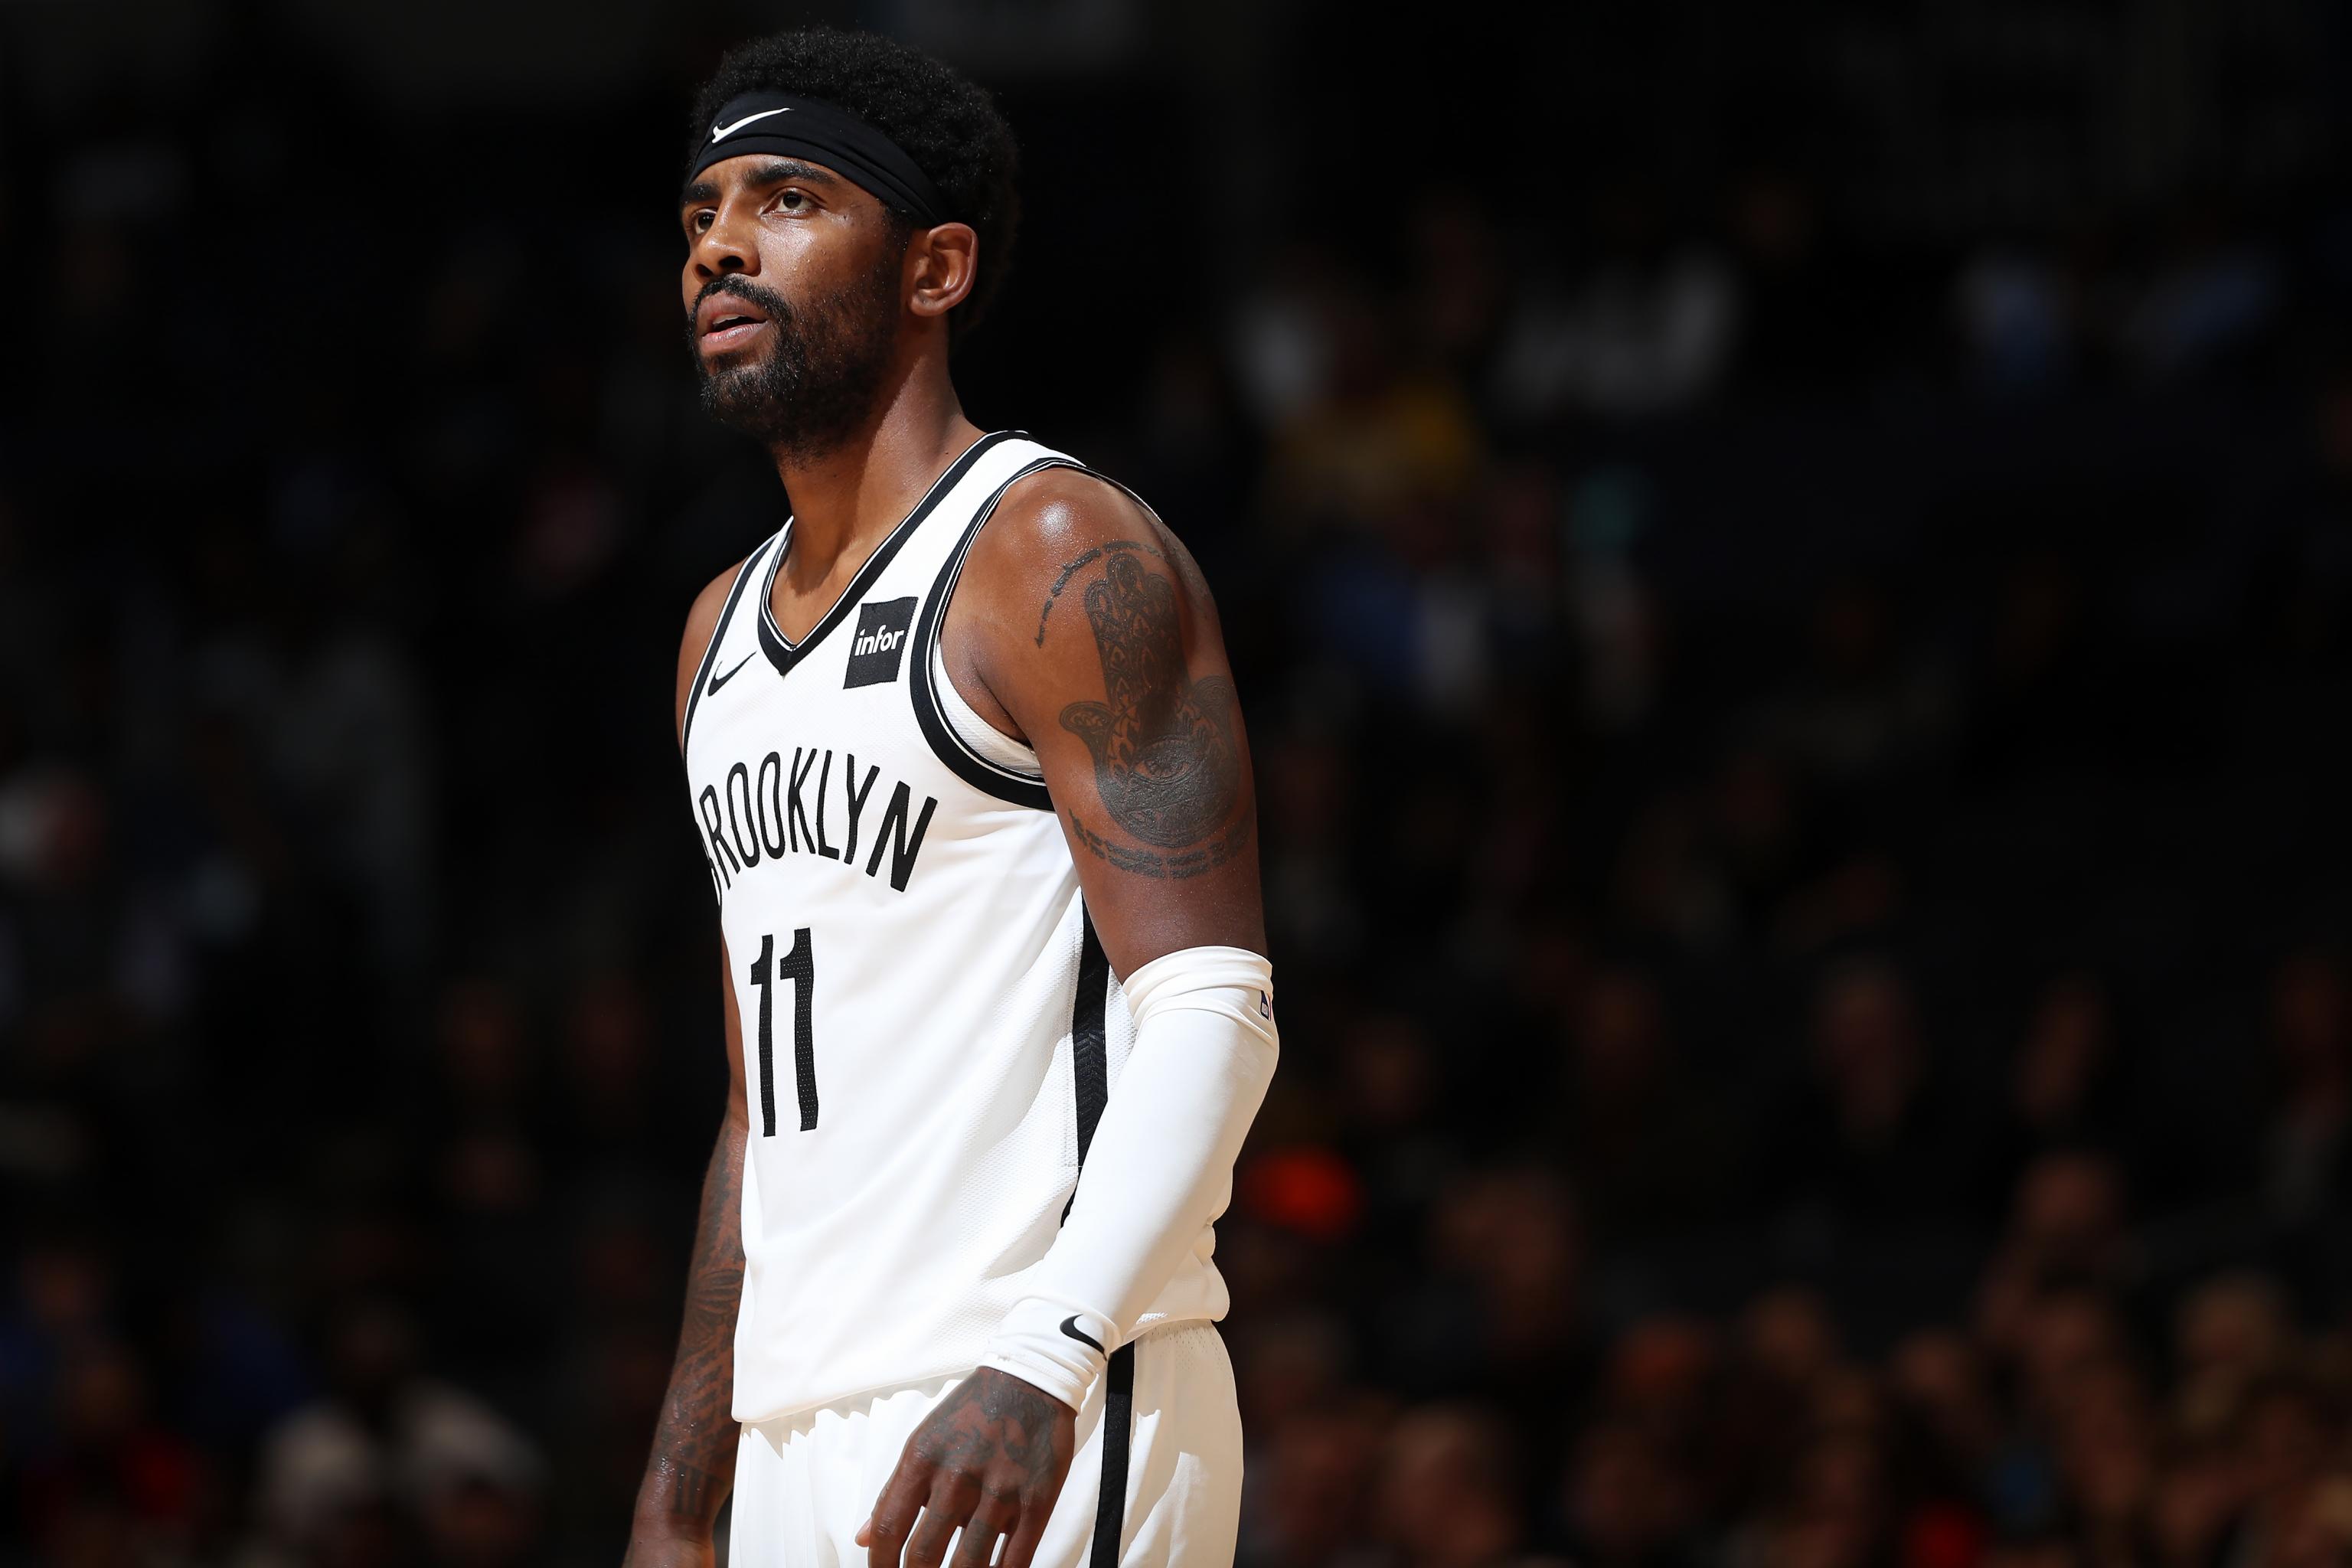 Report: Kyrie Irving #39 s Behavior Is #39 Unspoken Concern #39 Makes Nets #39 Queasy #39